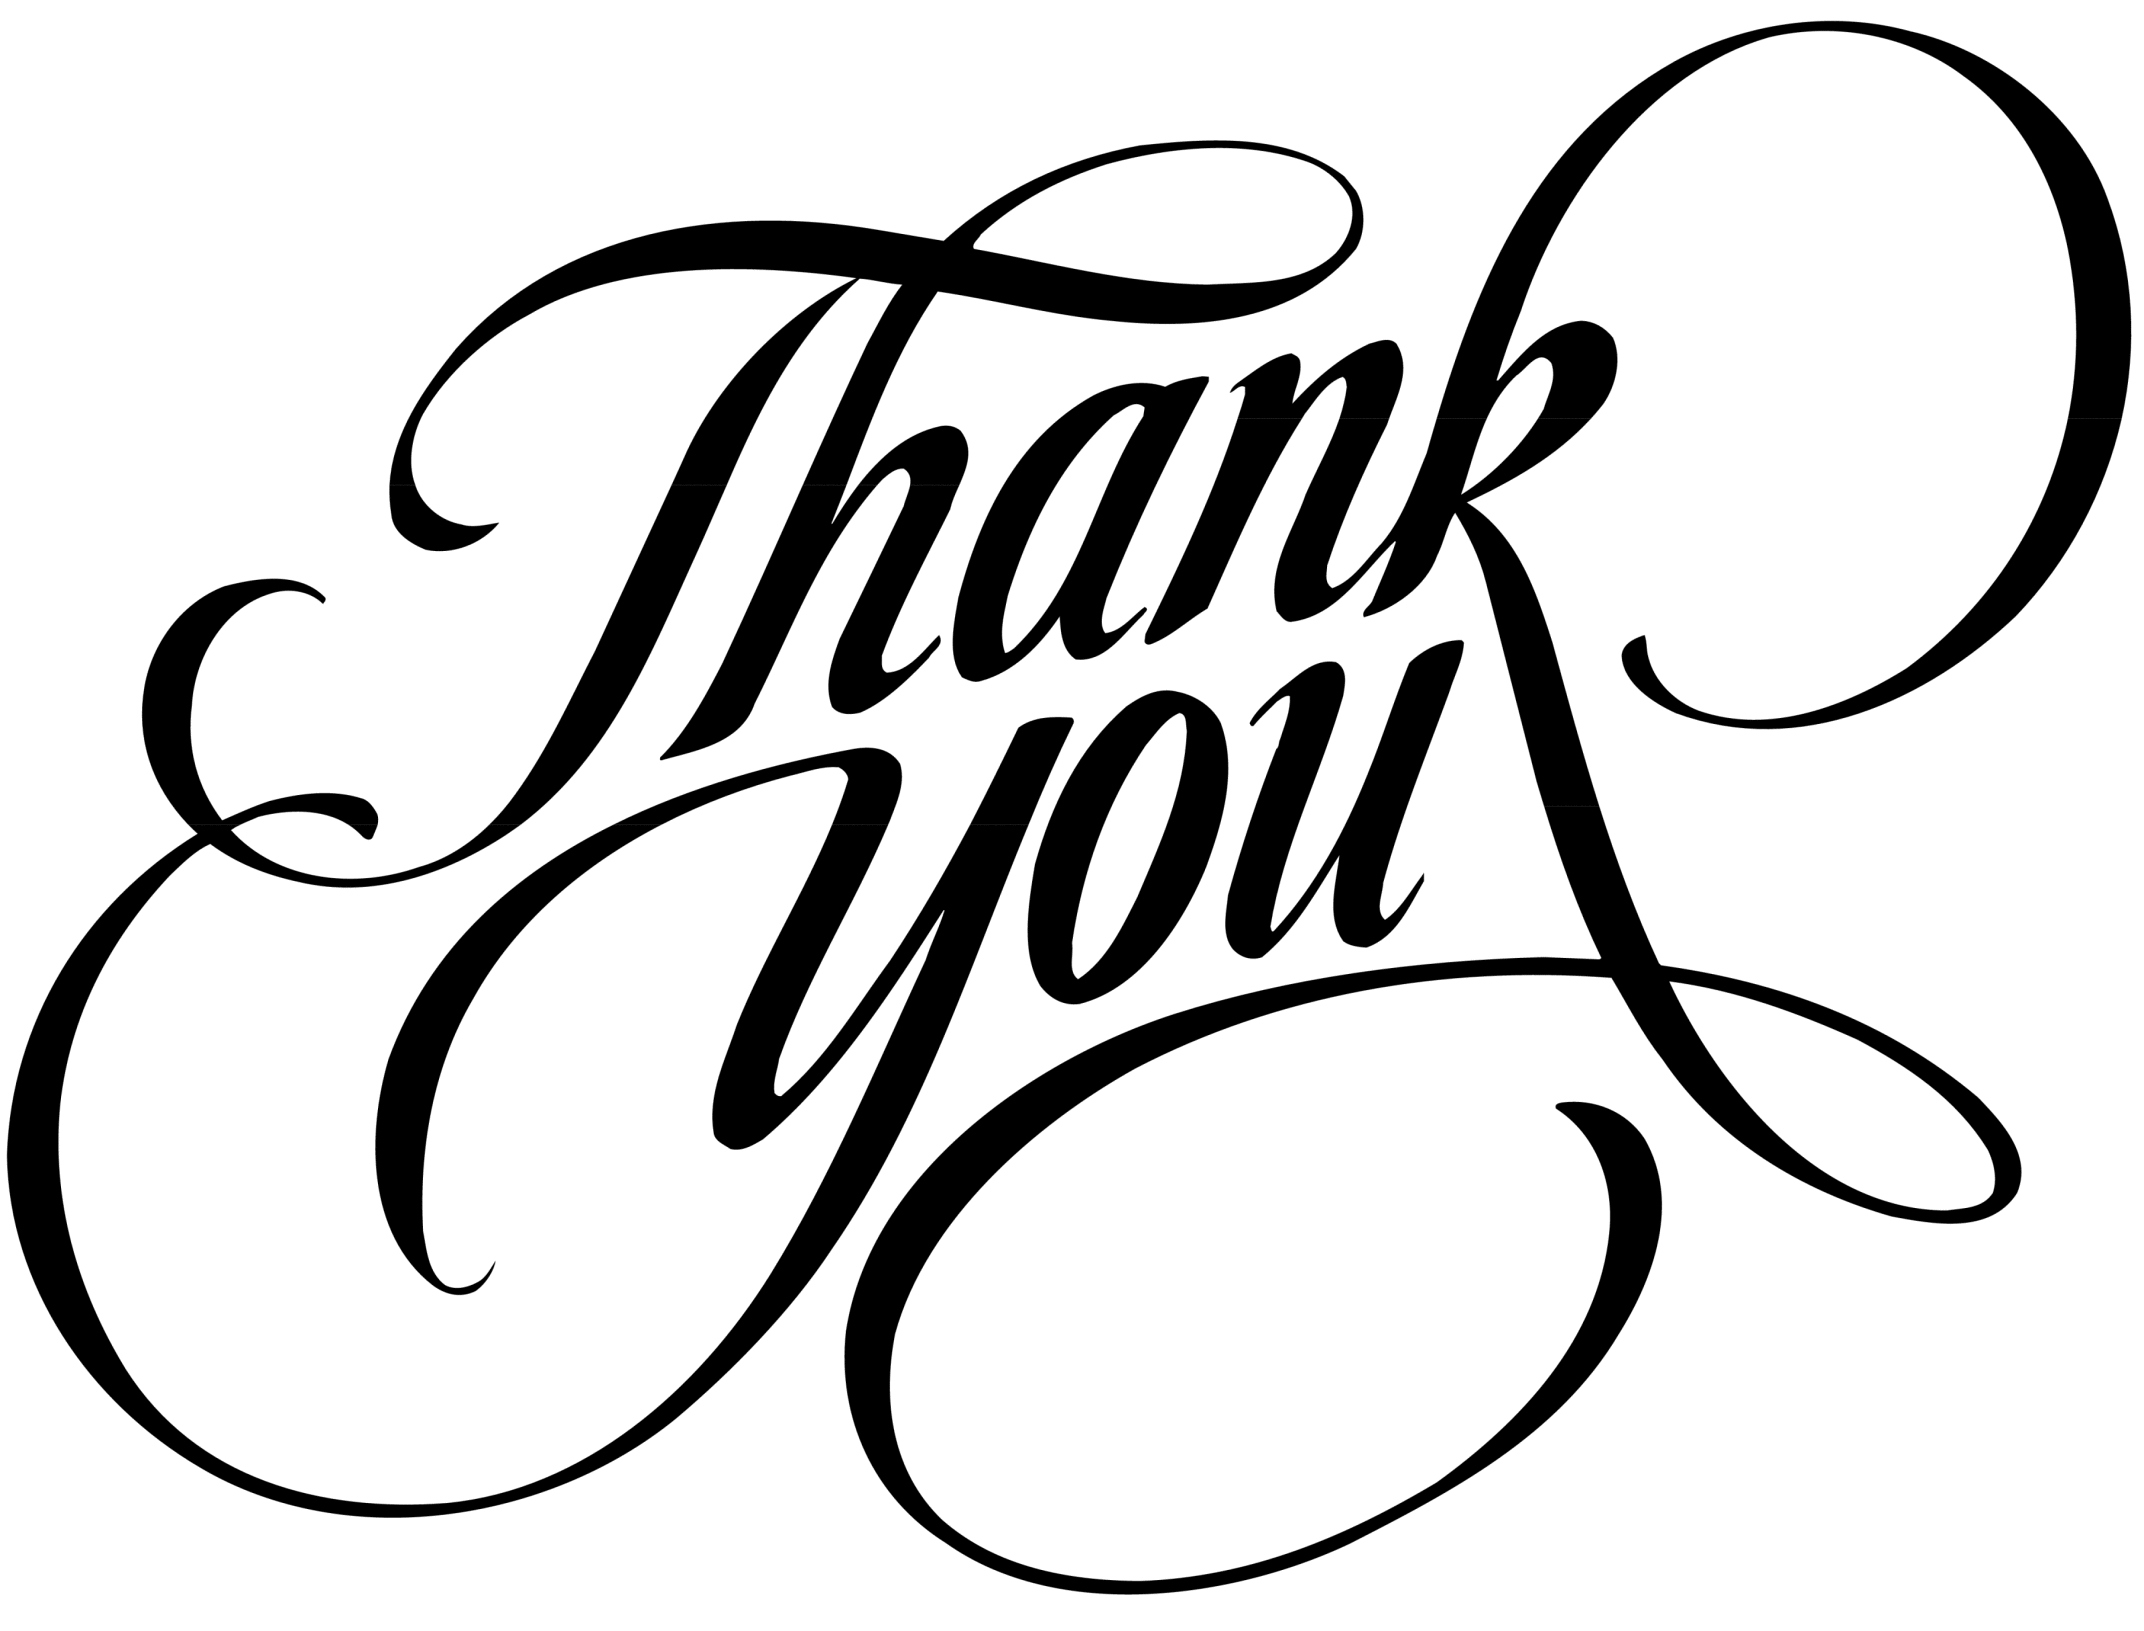 The words Thank You in cursive